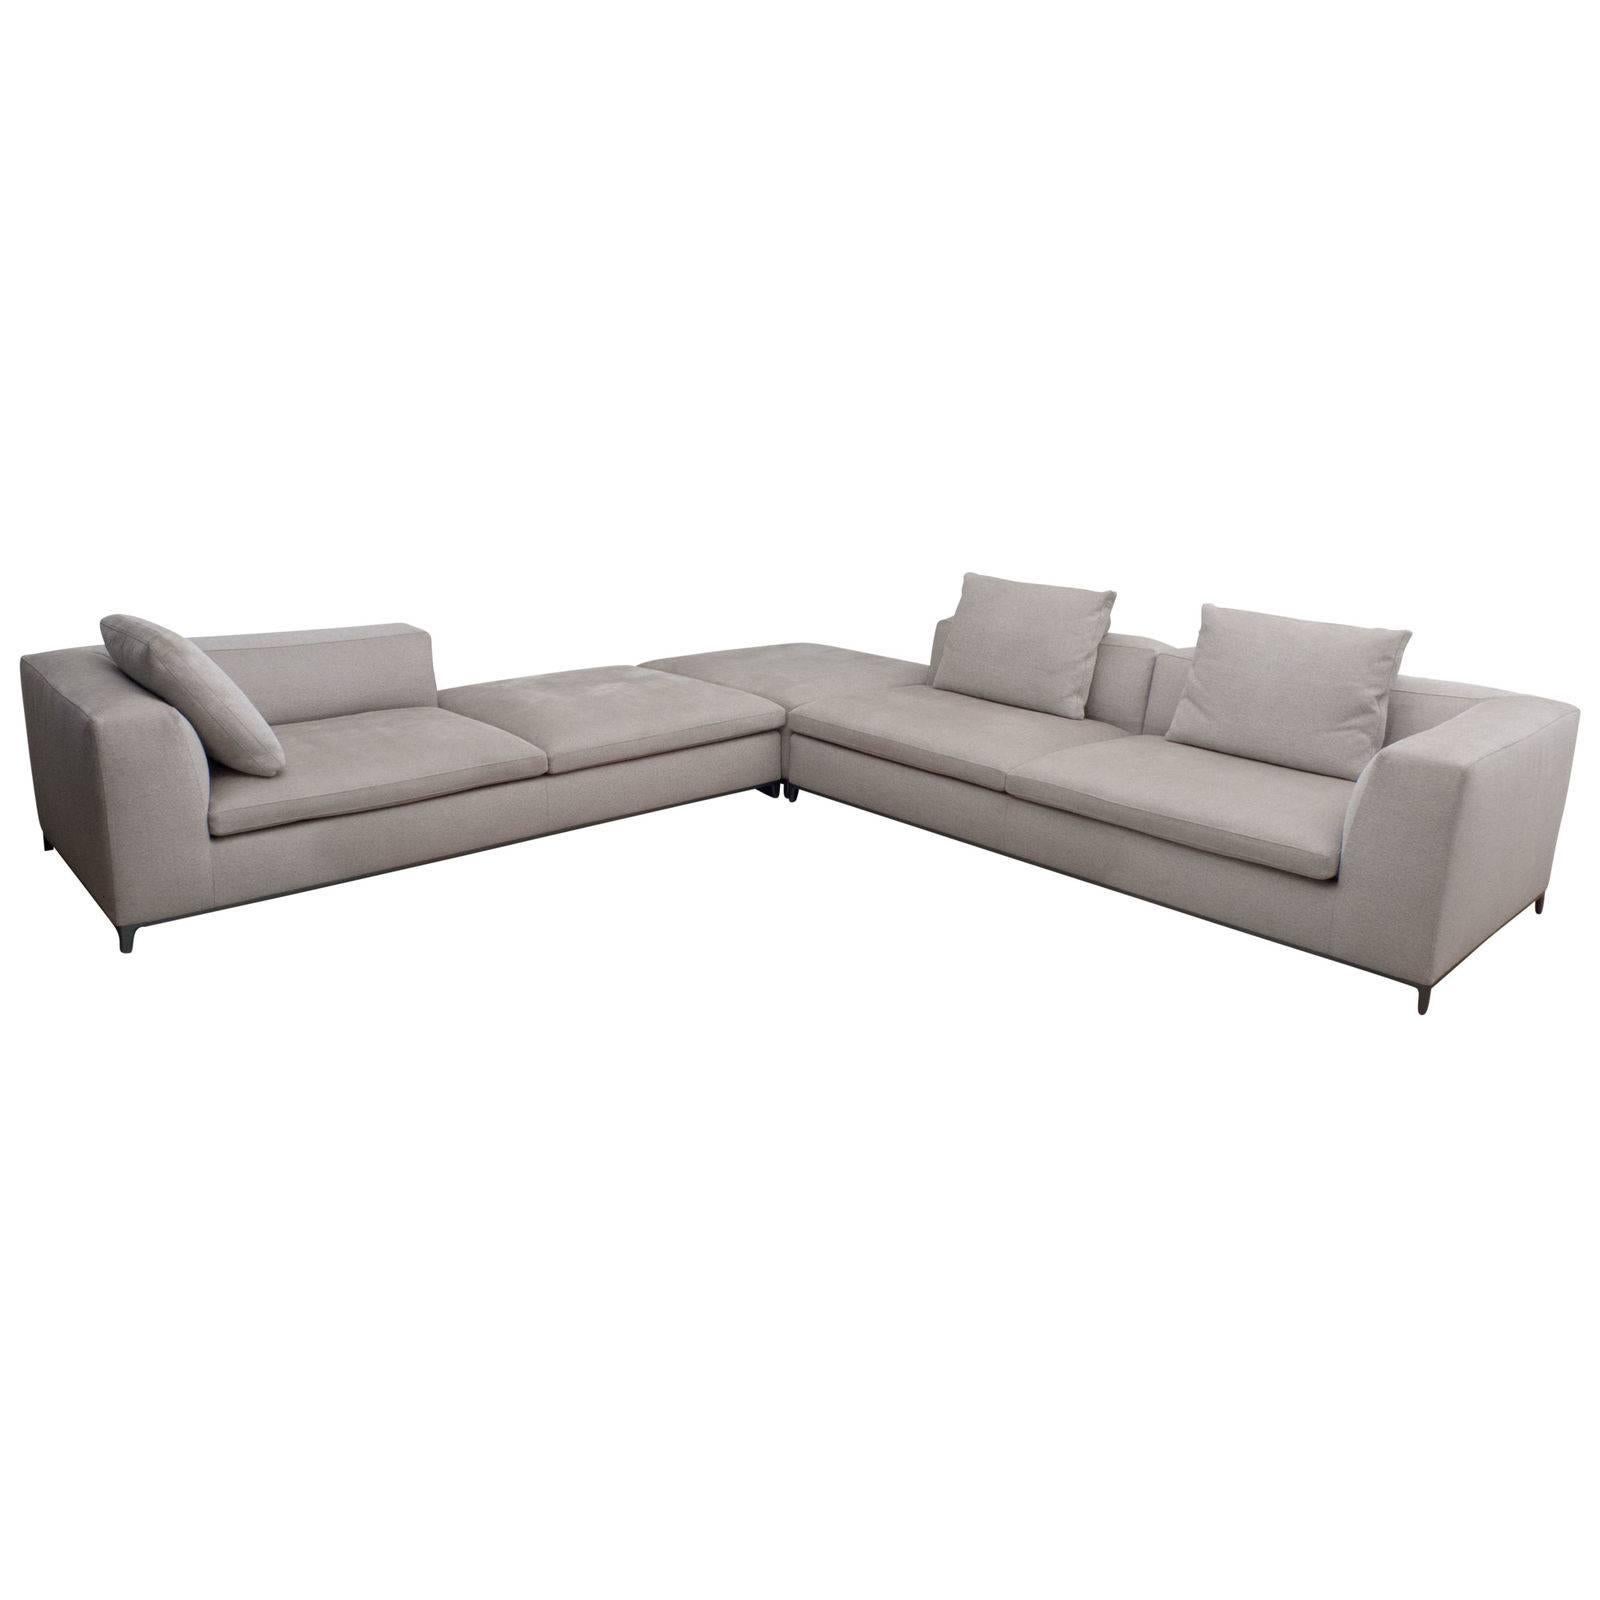 Corner sofa michel club comes with an ottoman and is made from polyurethan upholstery for cosy seating. Finished with finest fabrics this furniture item has proved for long lasting joy in every interior. Design by the famous Antonio Citterio.